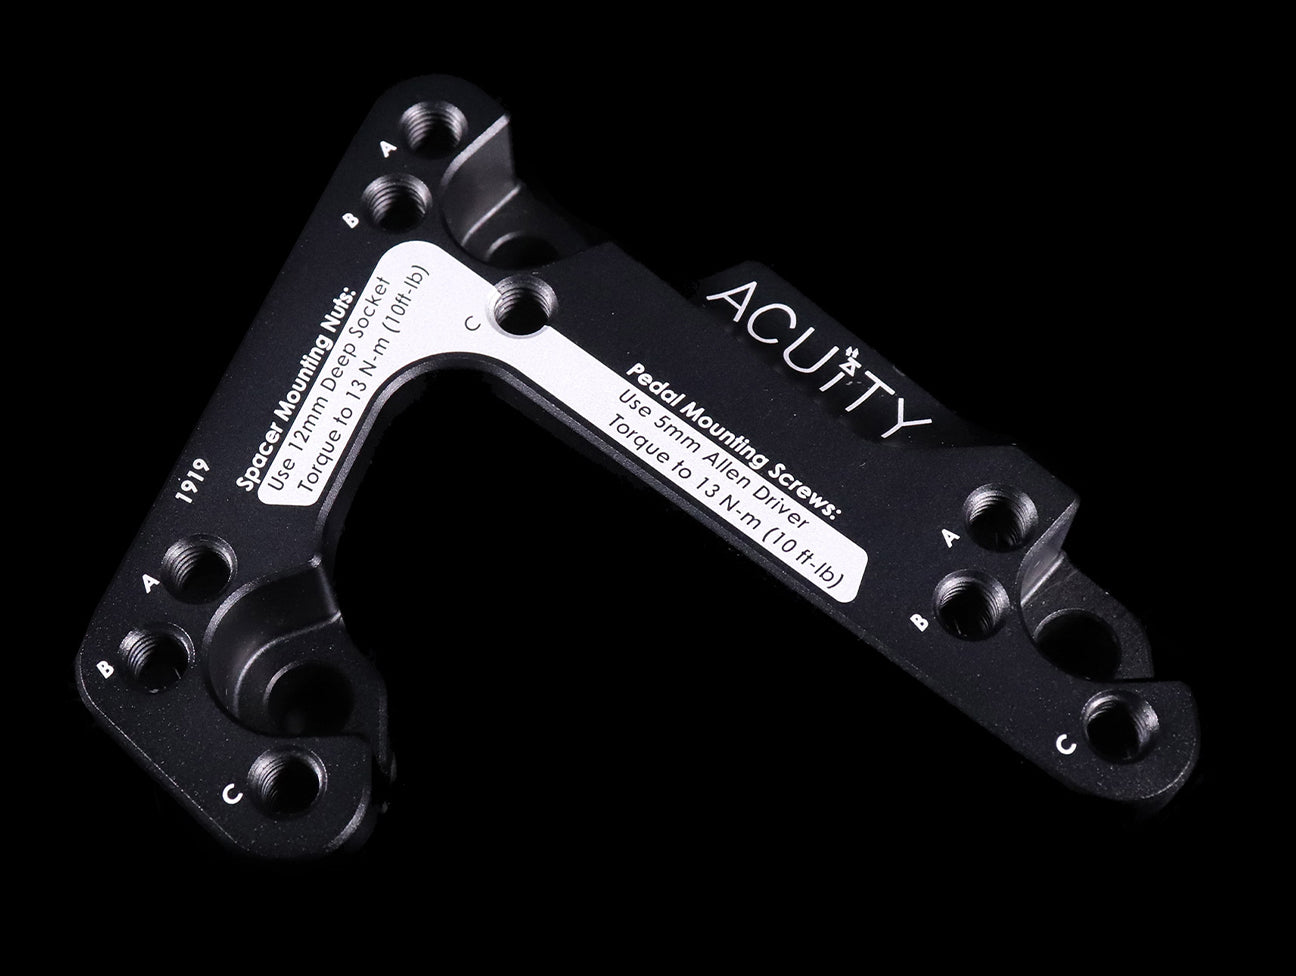 Acuity Throttle Pedal Spacer (LHD) - 12+ Civic / 14-17 Fit / 18+ Accord